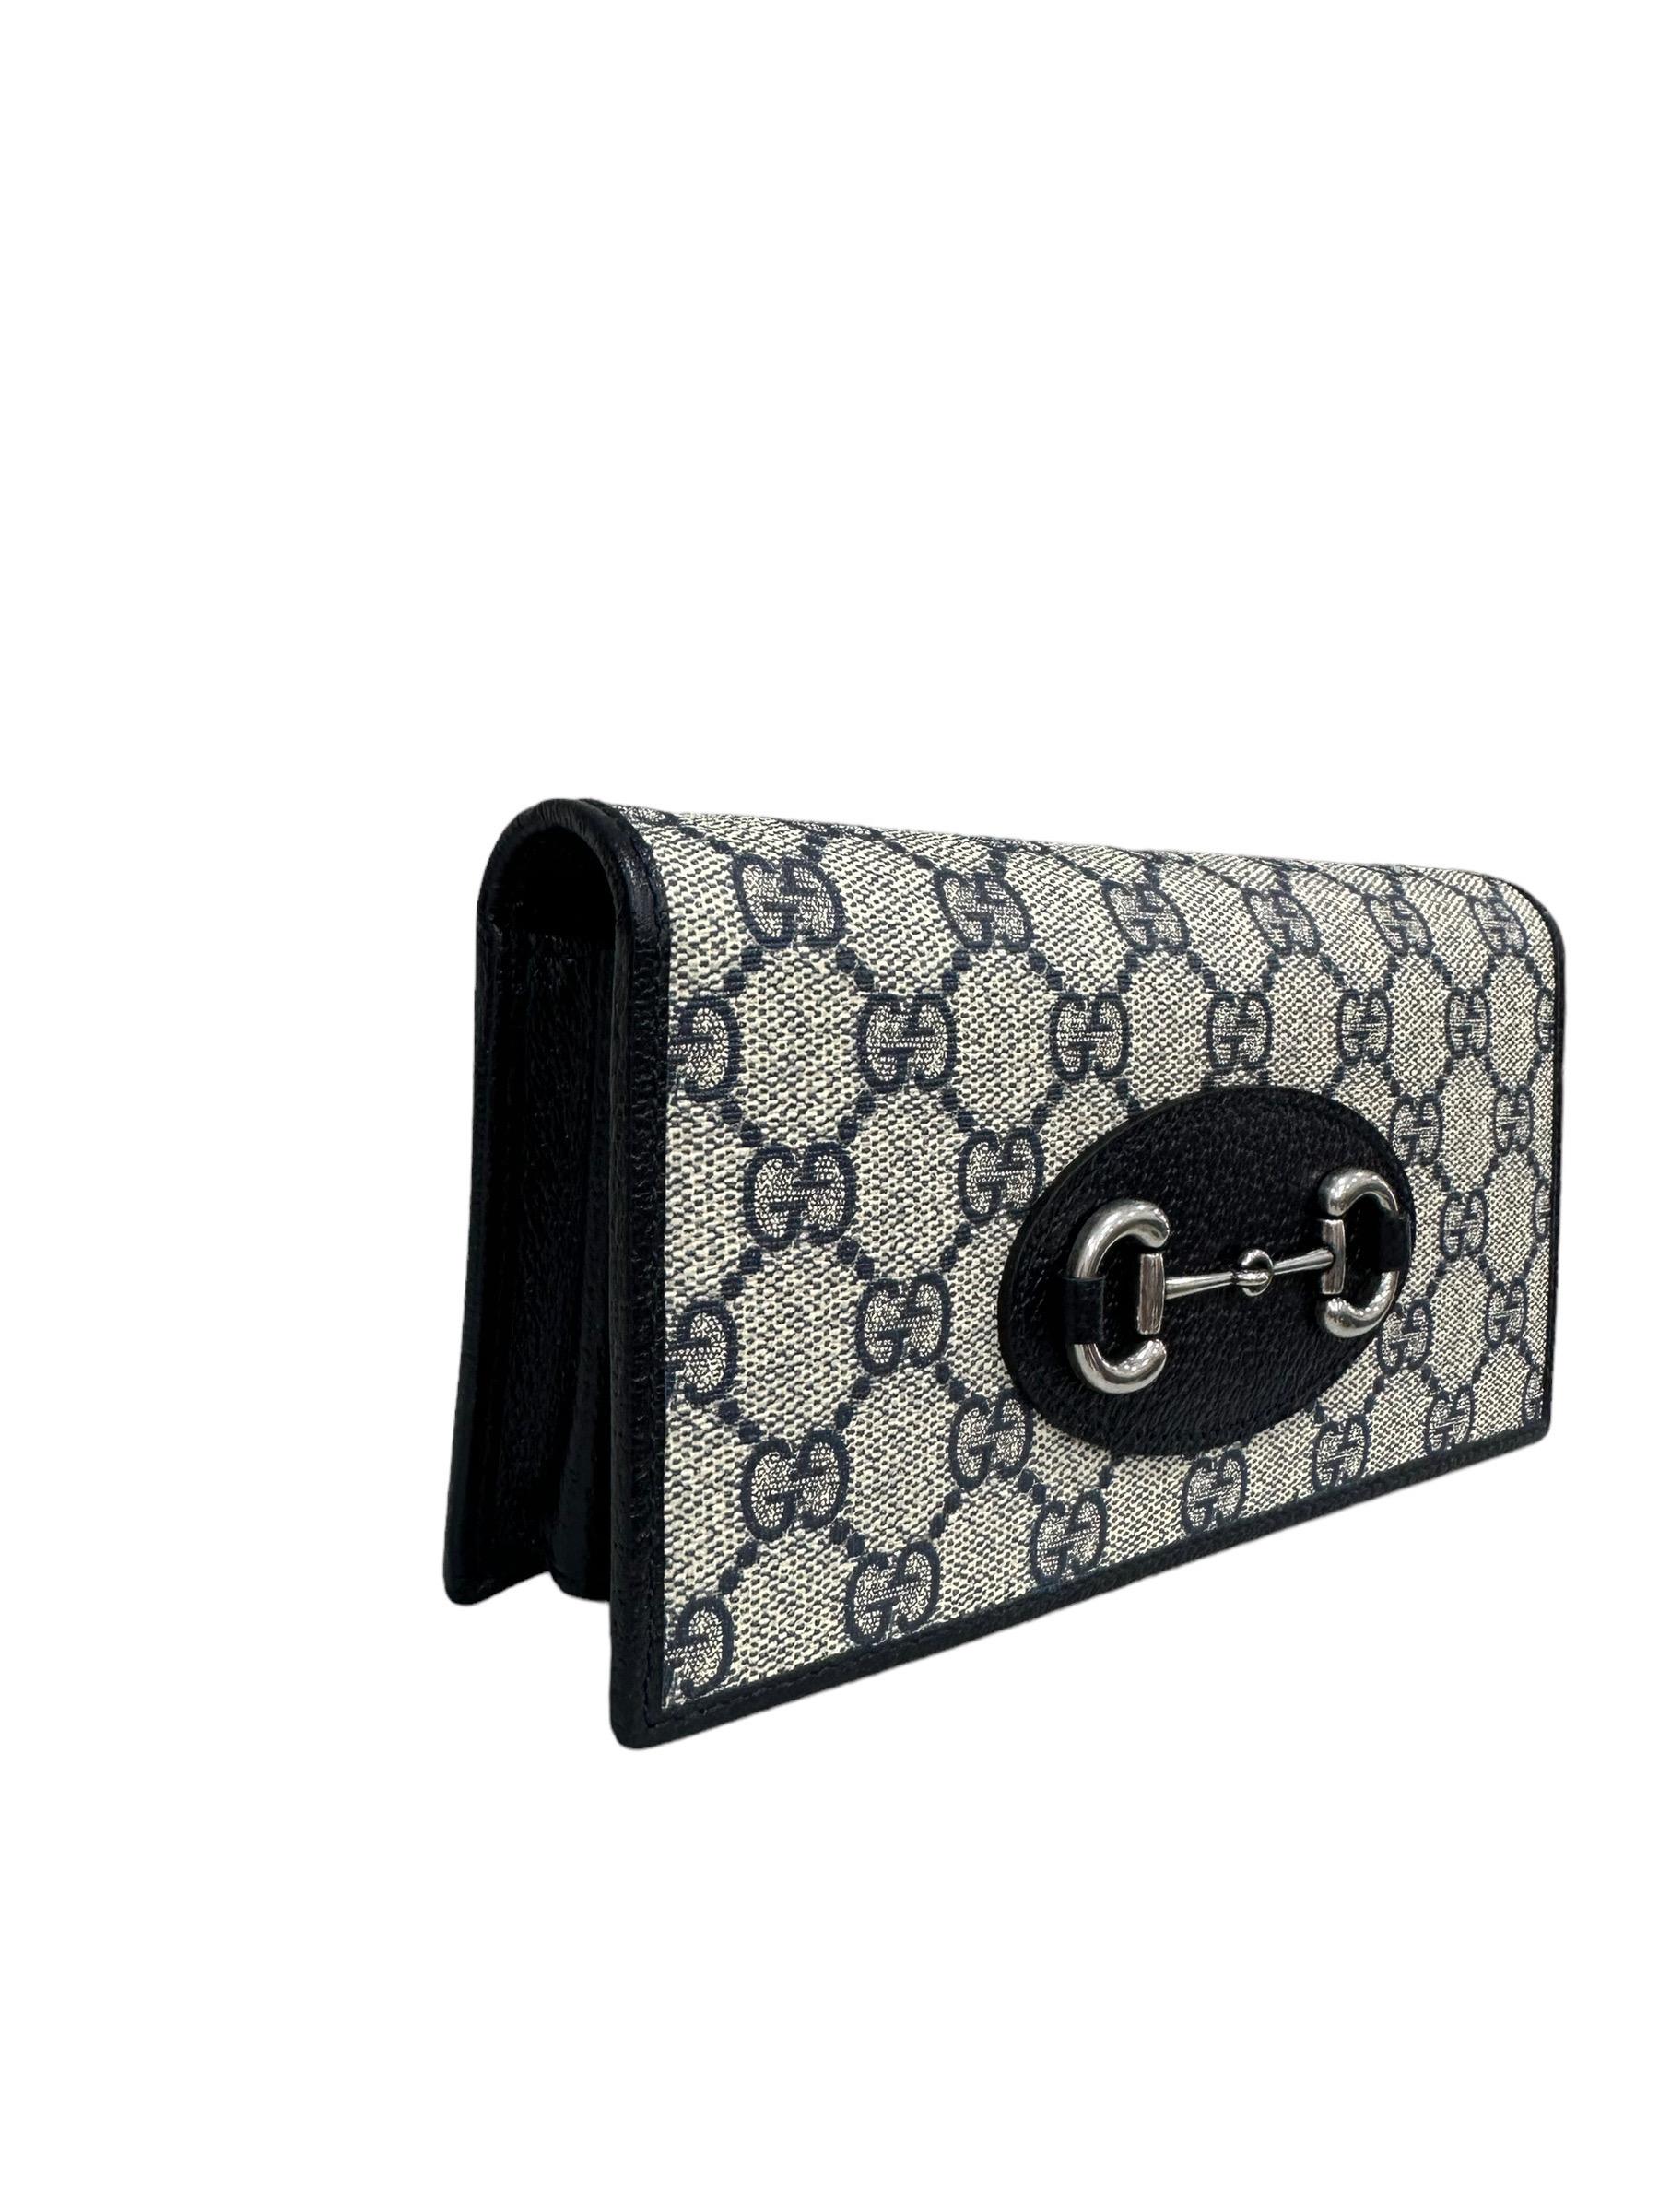 Gucci Wallet On Chain Horsebit 1955 GG Supreme Blu Beige In Excellent Condition For Sale In Torre Del Greco, IT